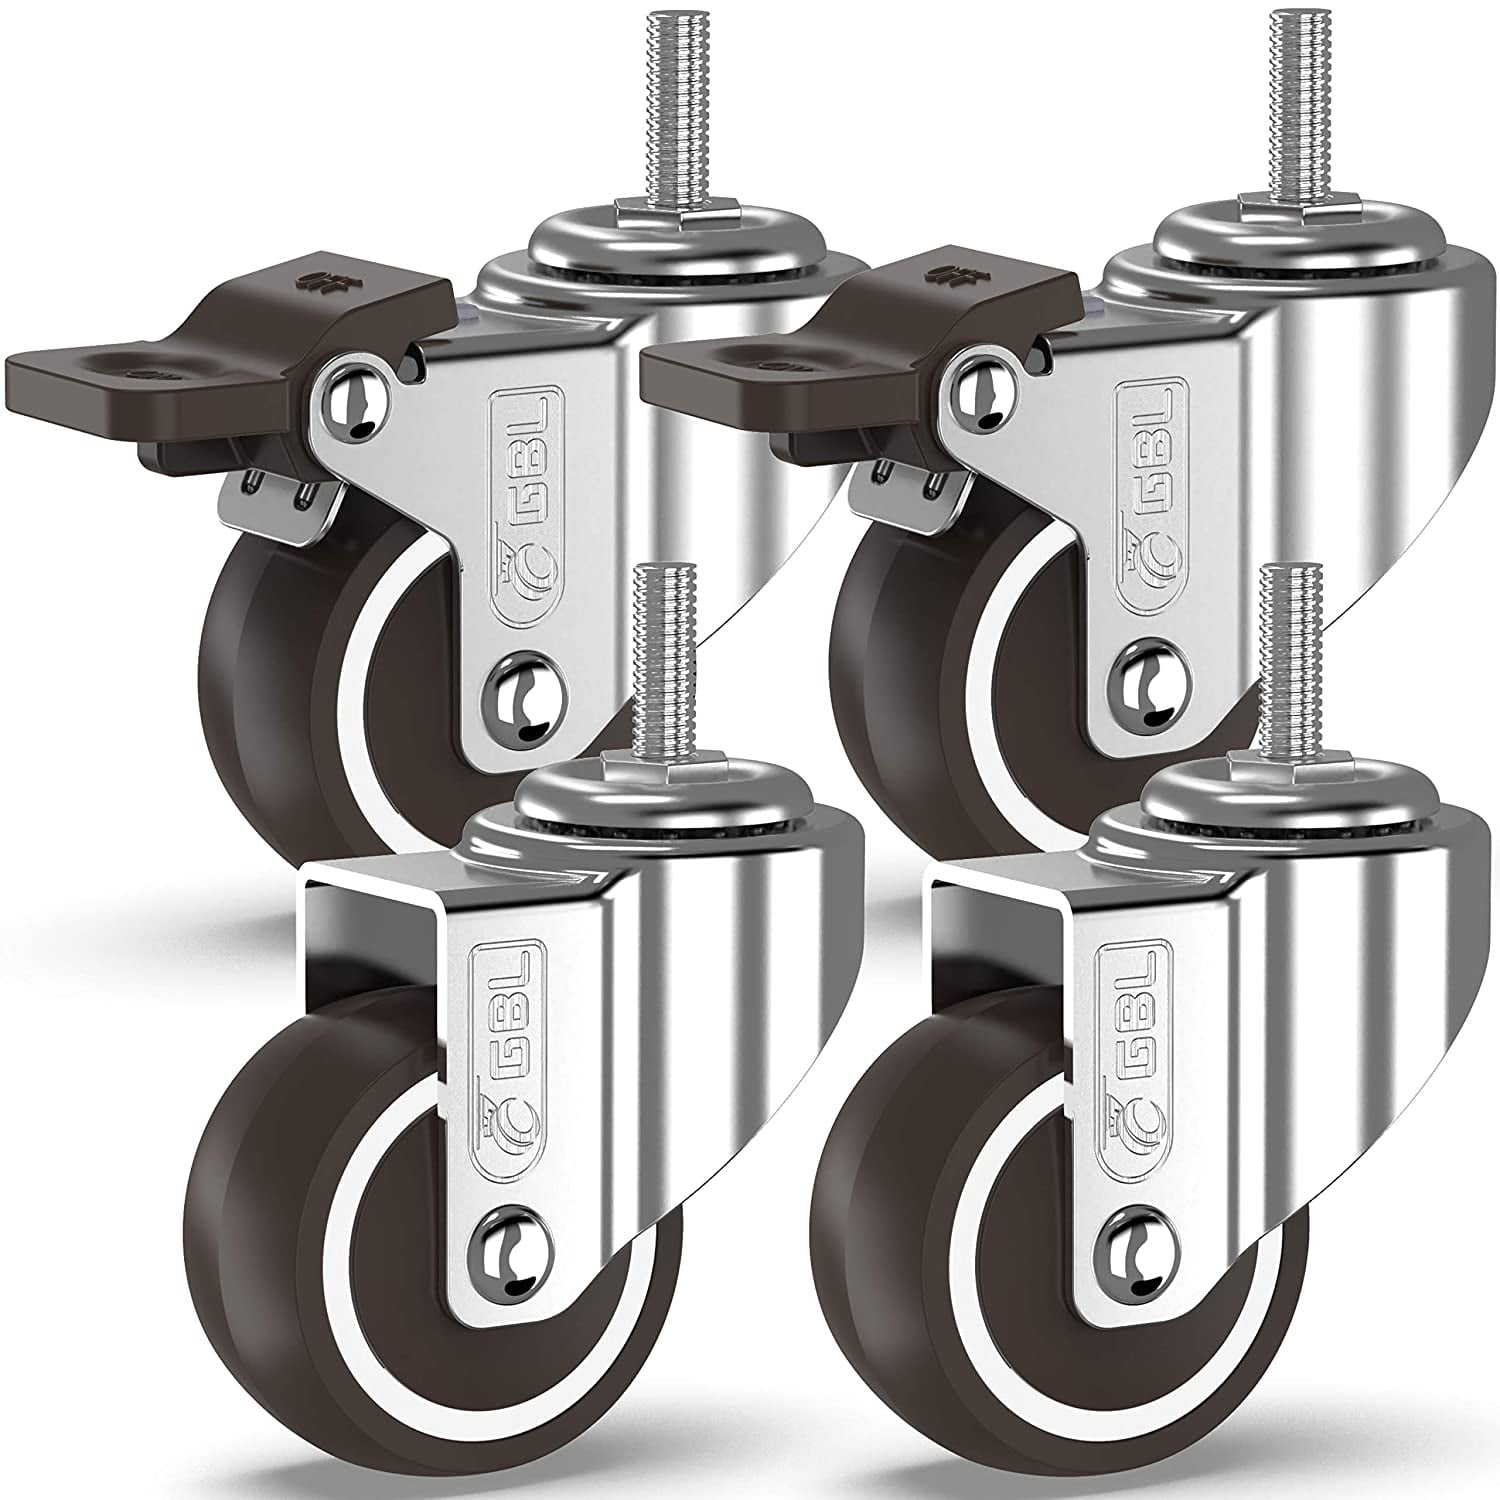 Tools Hand Trolley Movable Furniture M10 Heavy Duty Swivel Casters Loading 440 Lbs 4 Pack of 2 Inch Stem Casters for Shopping Carts 2 with Brakes & 2 Without 